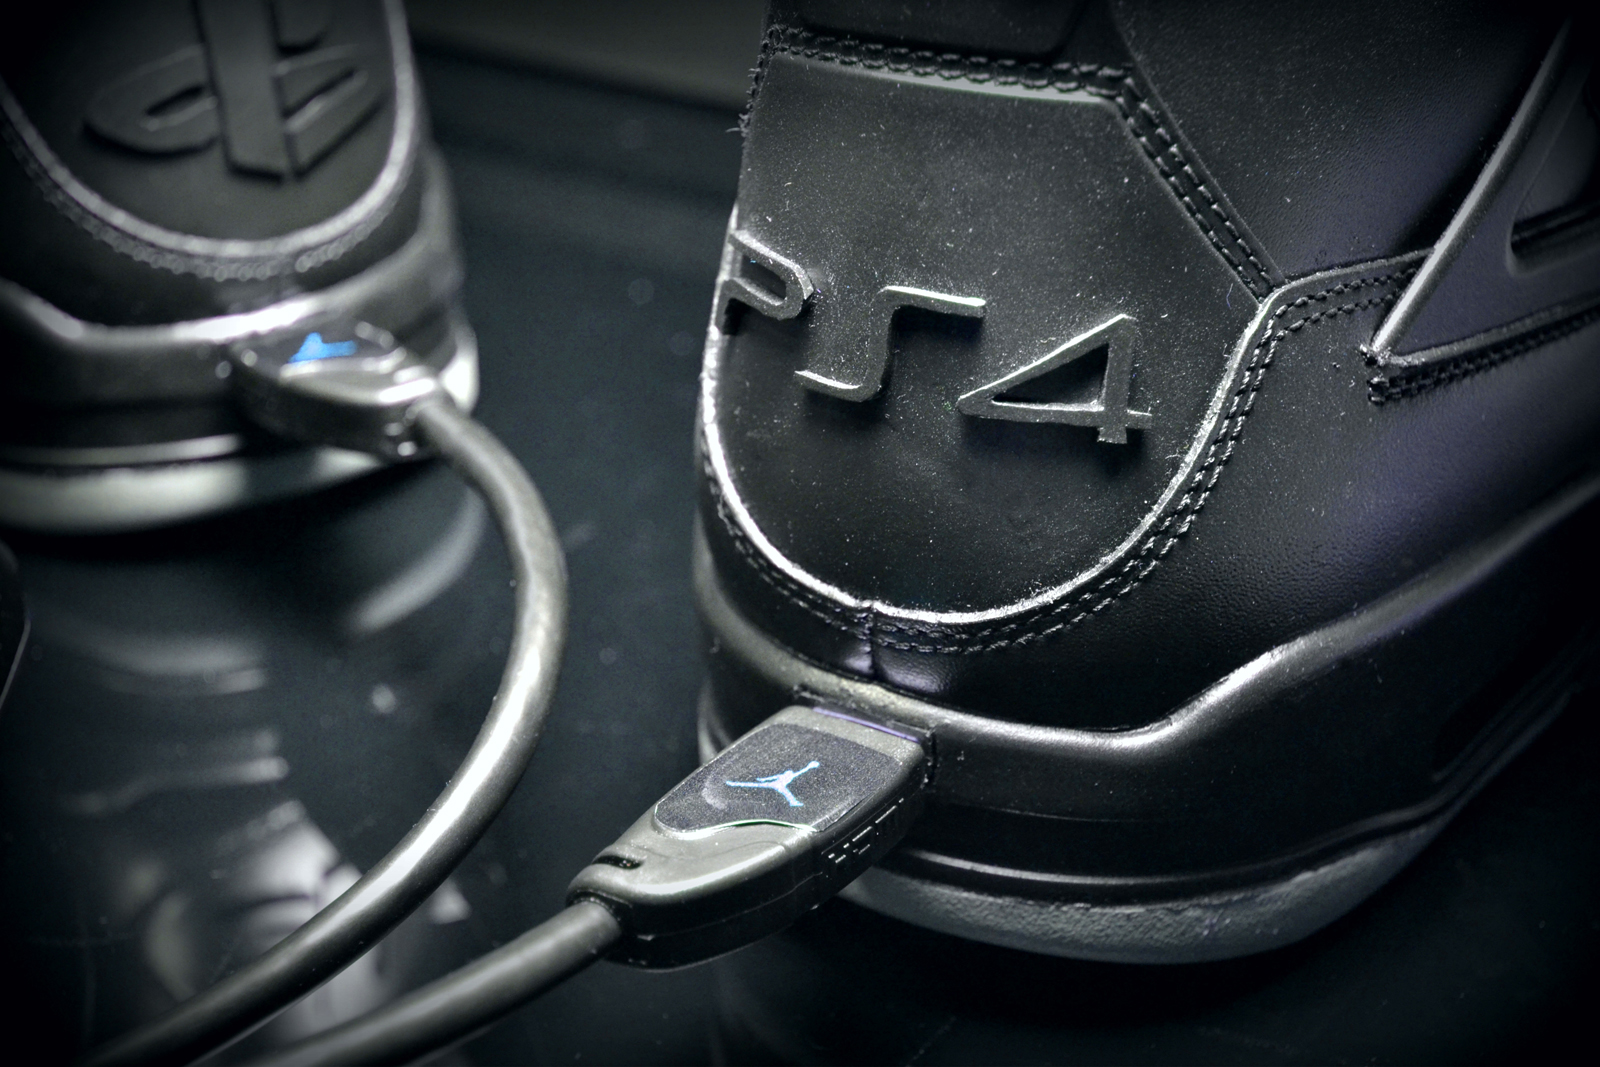 PS4 Sneakers Are Badass In The Front, Silly In The Back